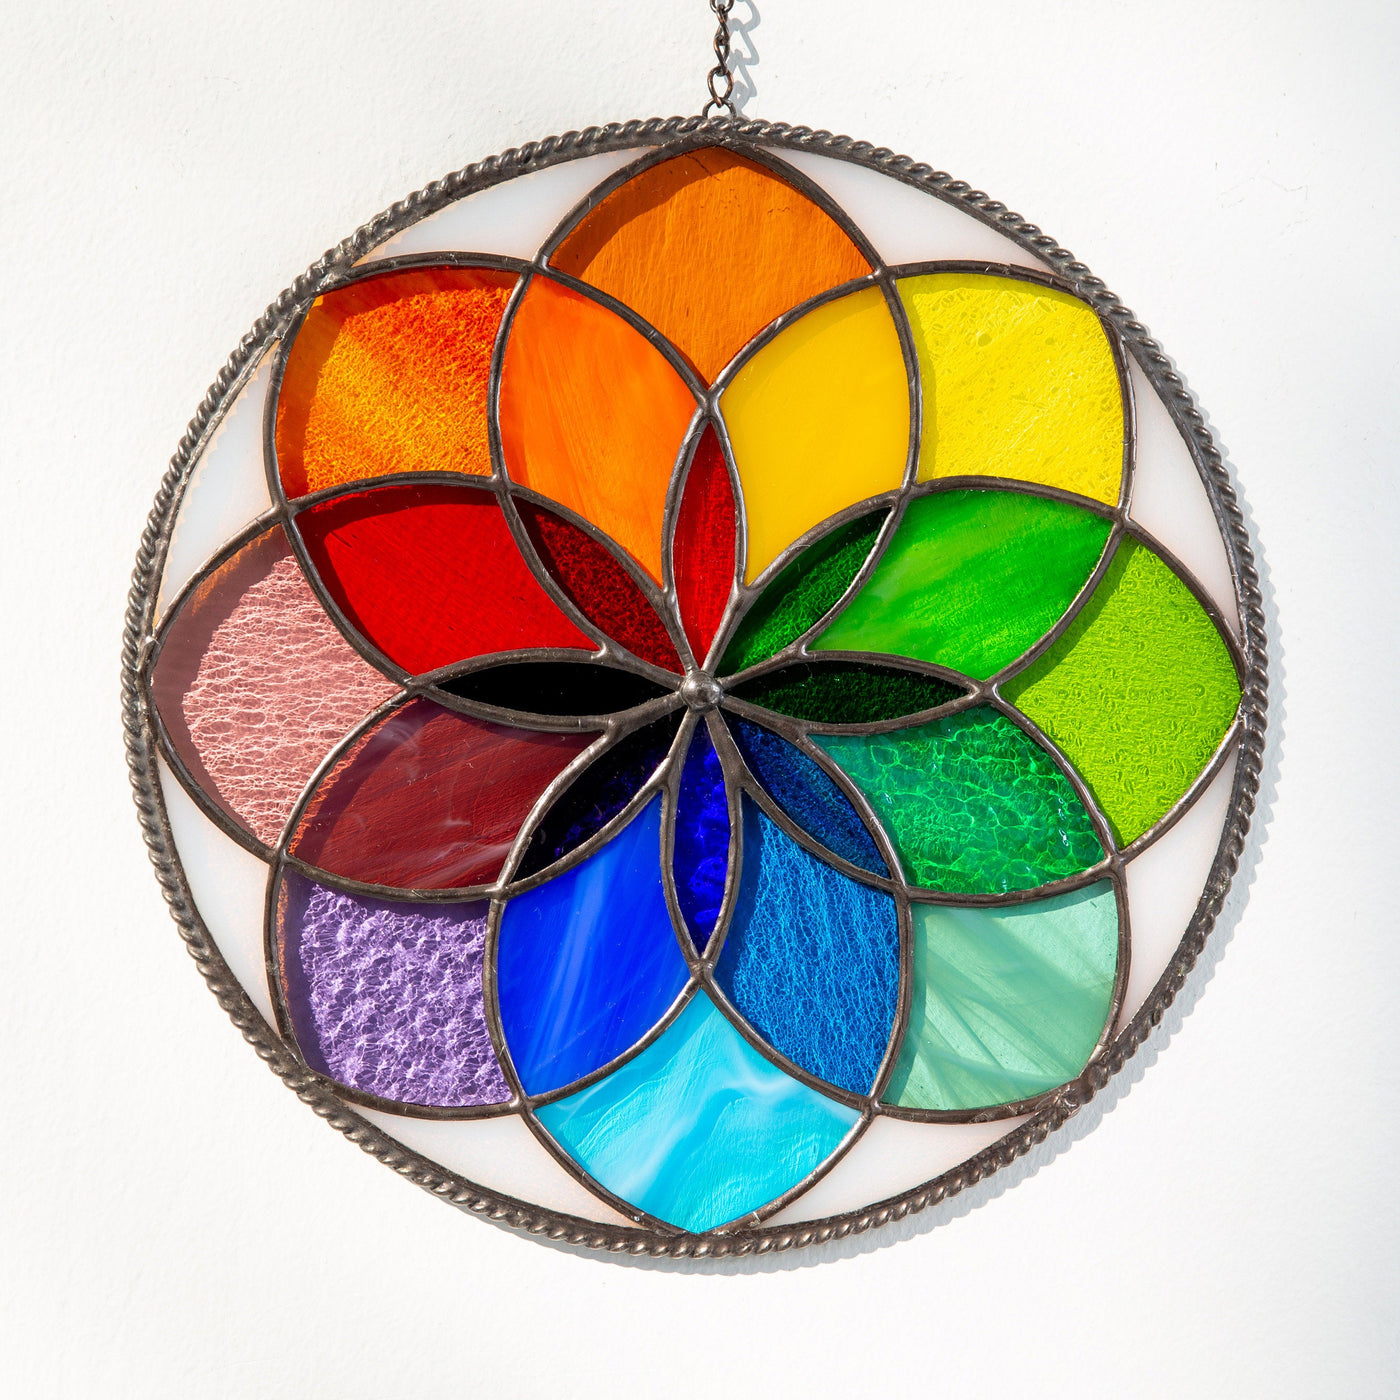 Mandala stained glass panel Rainbow stained glass window hangings Housewarming gift